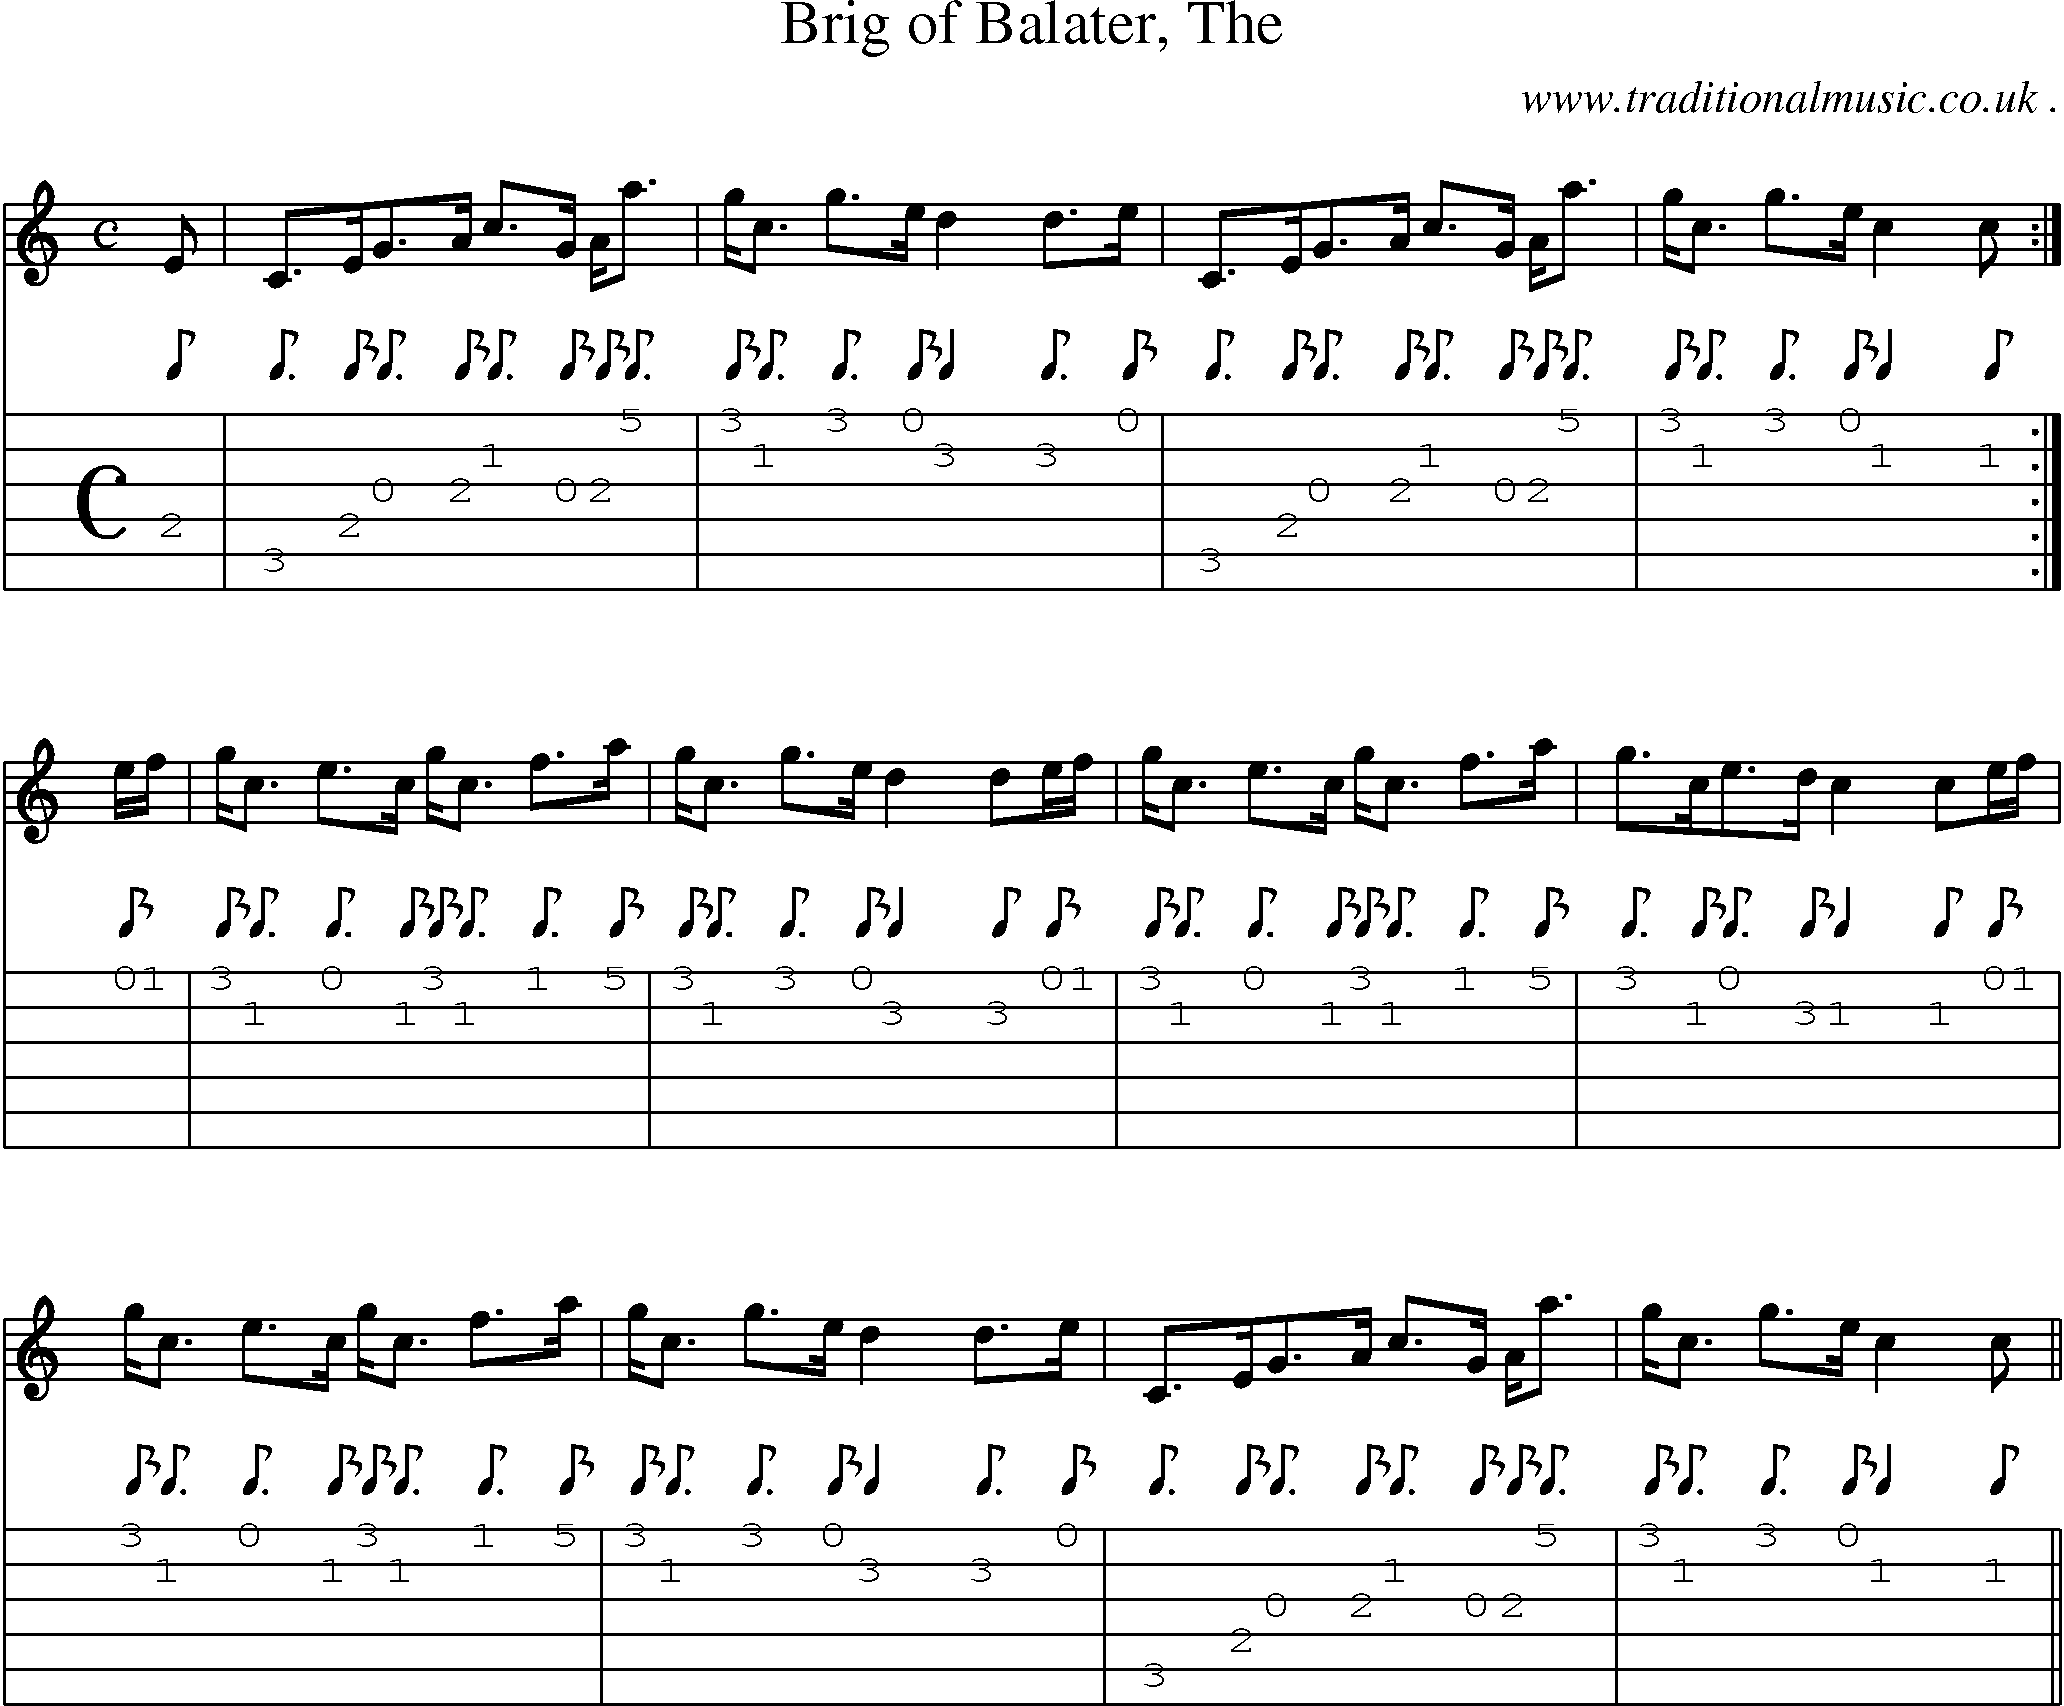 Sheet-music  score, Chords and Guitar Tabs for Brig Of Balater The